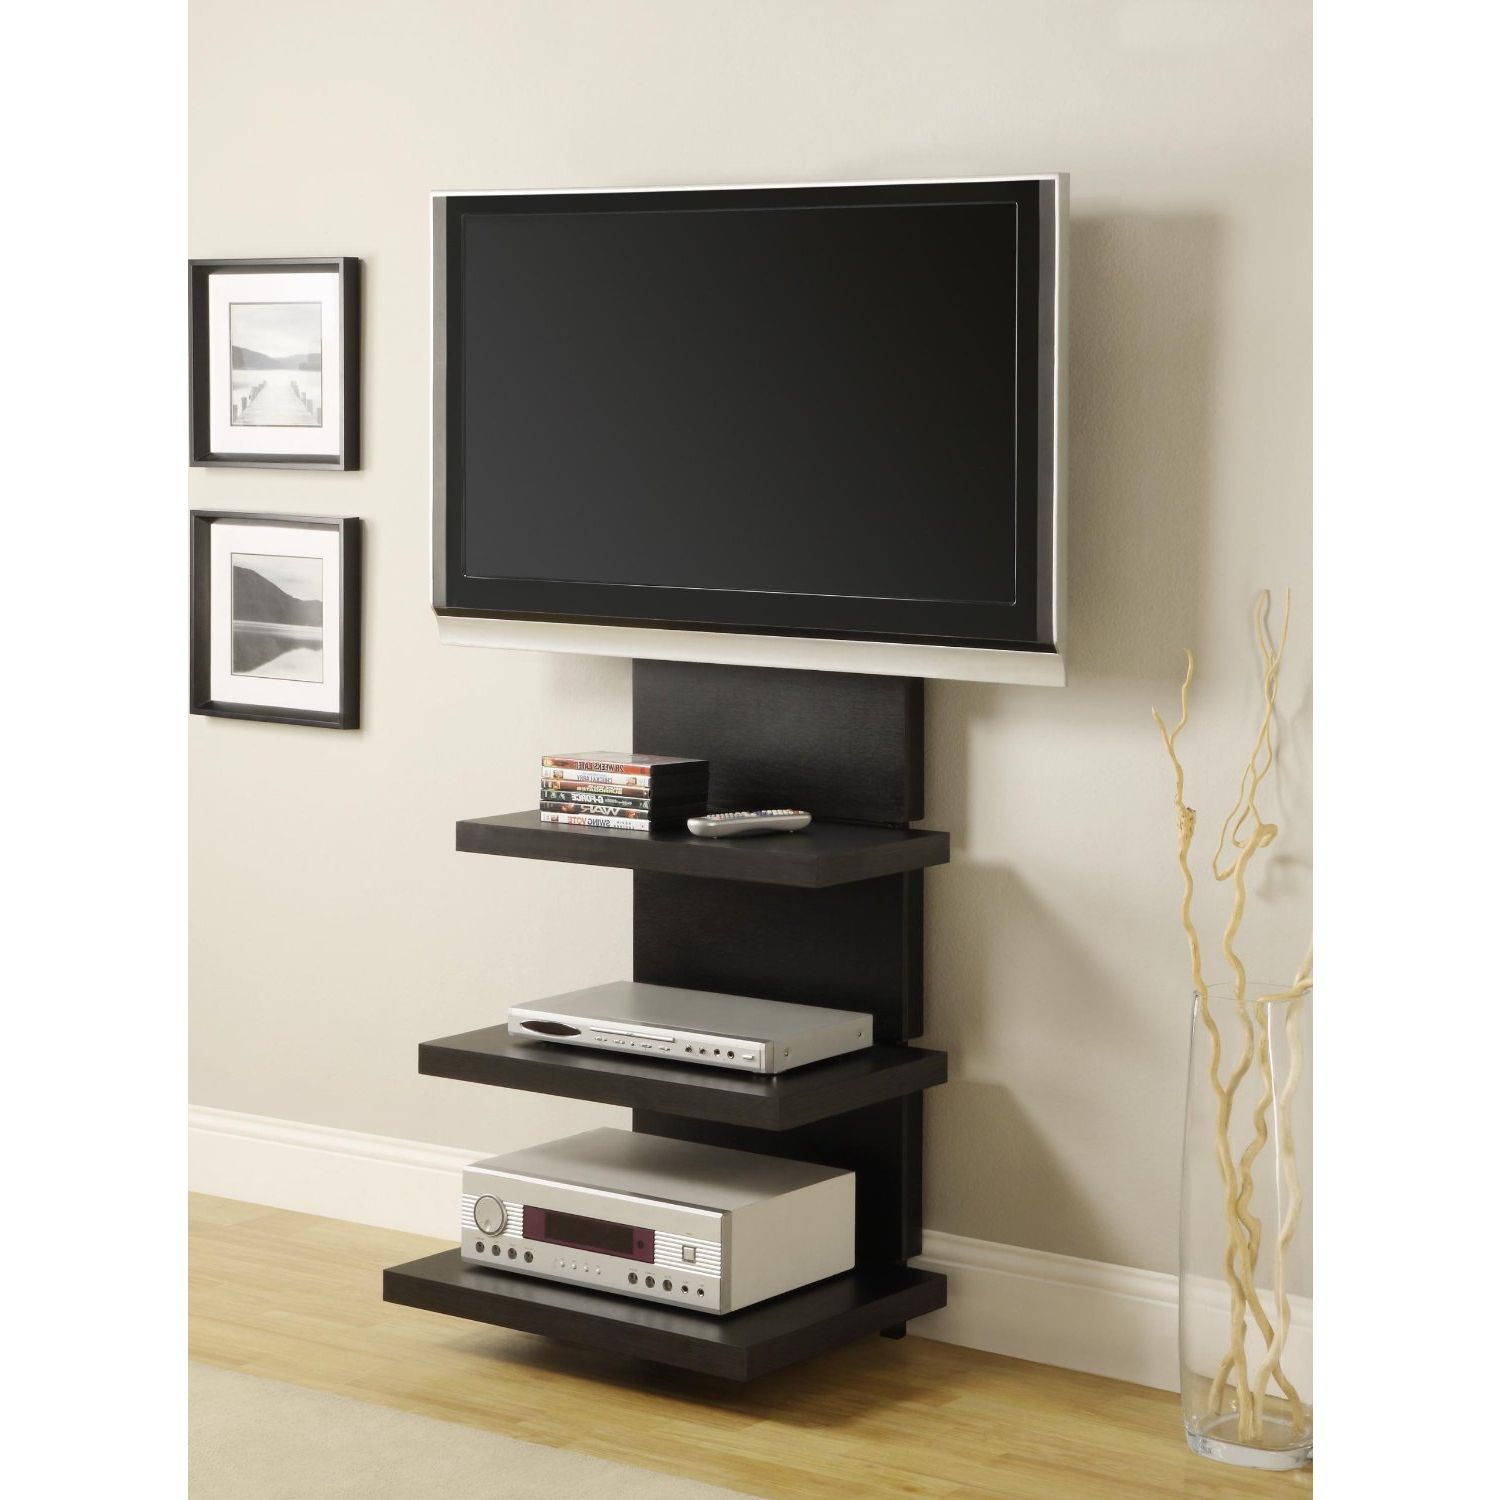 Small Corner Tv Stands Throughout Trendy Bedroom Television Cabinets And Stands Small Corner Tv Unit Tall Tv (View 17 of 20)